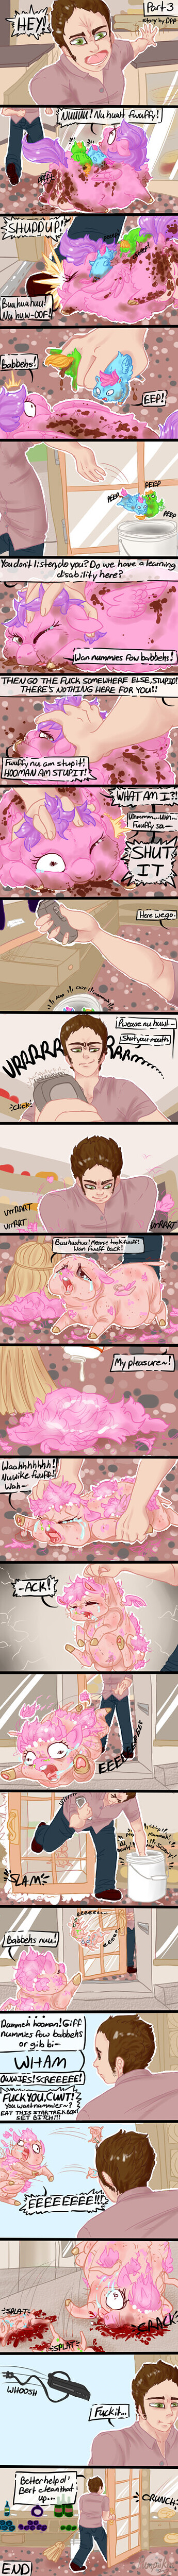 48413 - abuse artist_pumpiikin author_deathproofpony bleeding blood comic commission commissions crotch_tits crotchtits dead_foals deathproofpony dirty_fluffy doodles explicit finished_commission fluffy foals food f